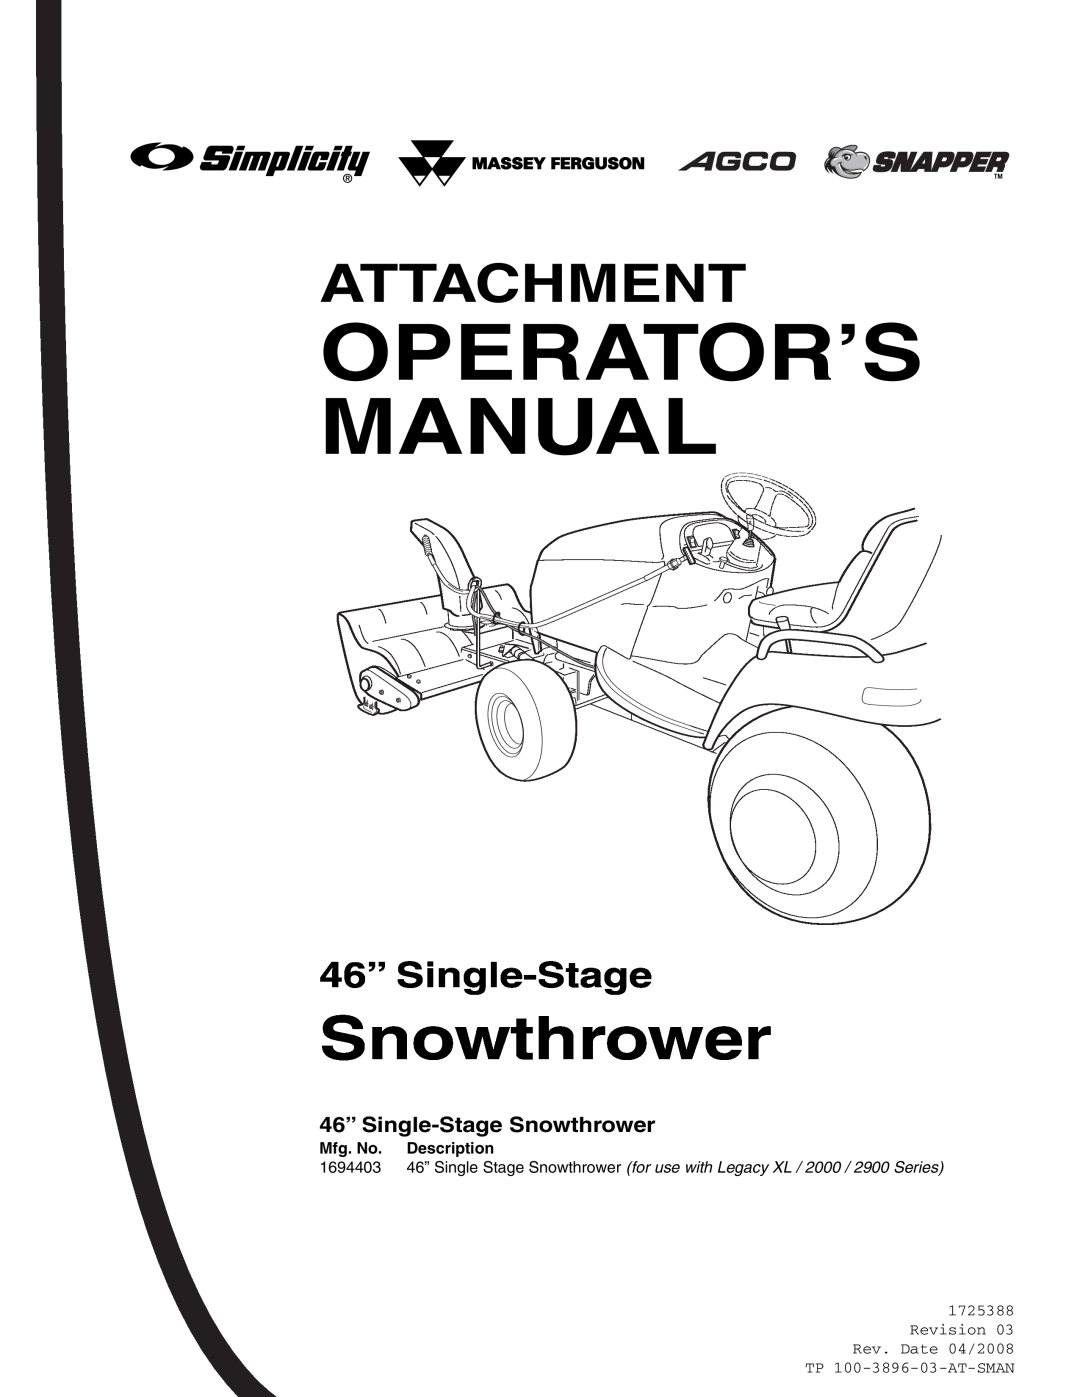 Snapper Legacy XL 2000, Legacy XL 2900 manual 46” Single-Stage Snowthrower, Operator’S Manual, Attachment 